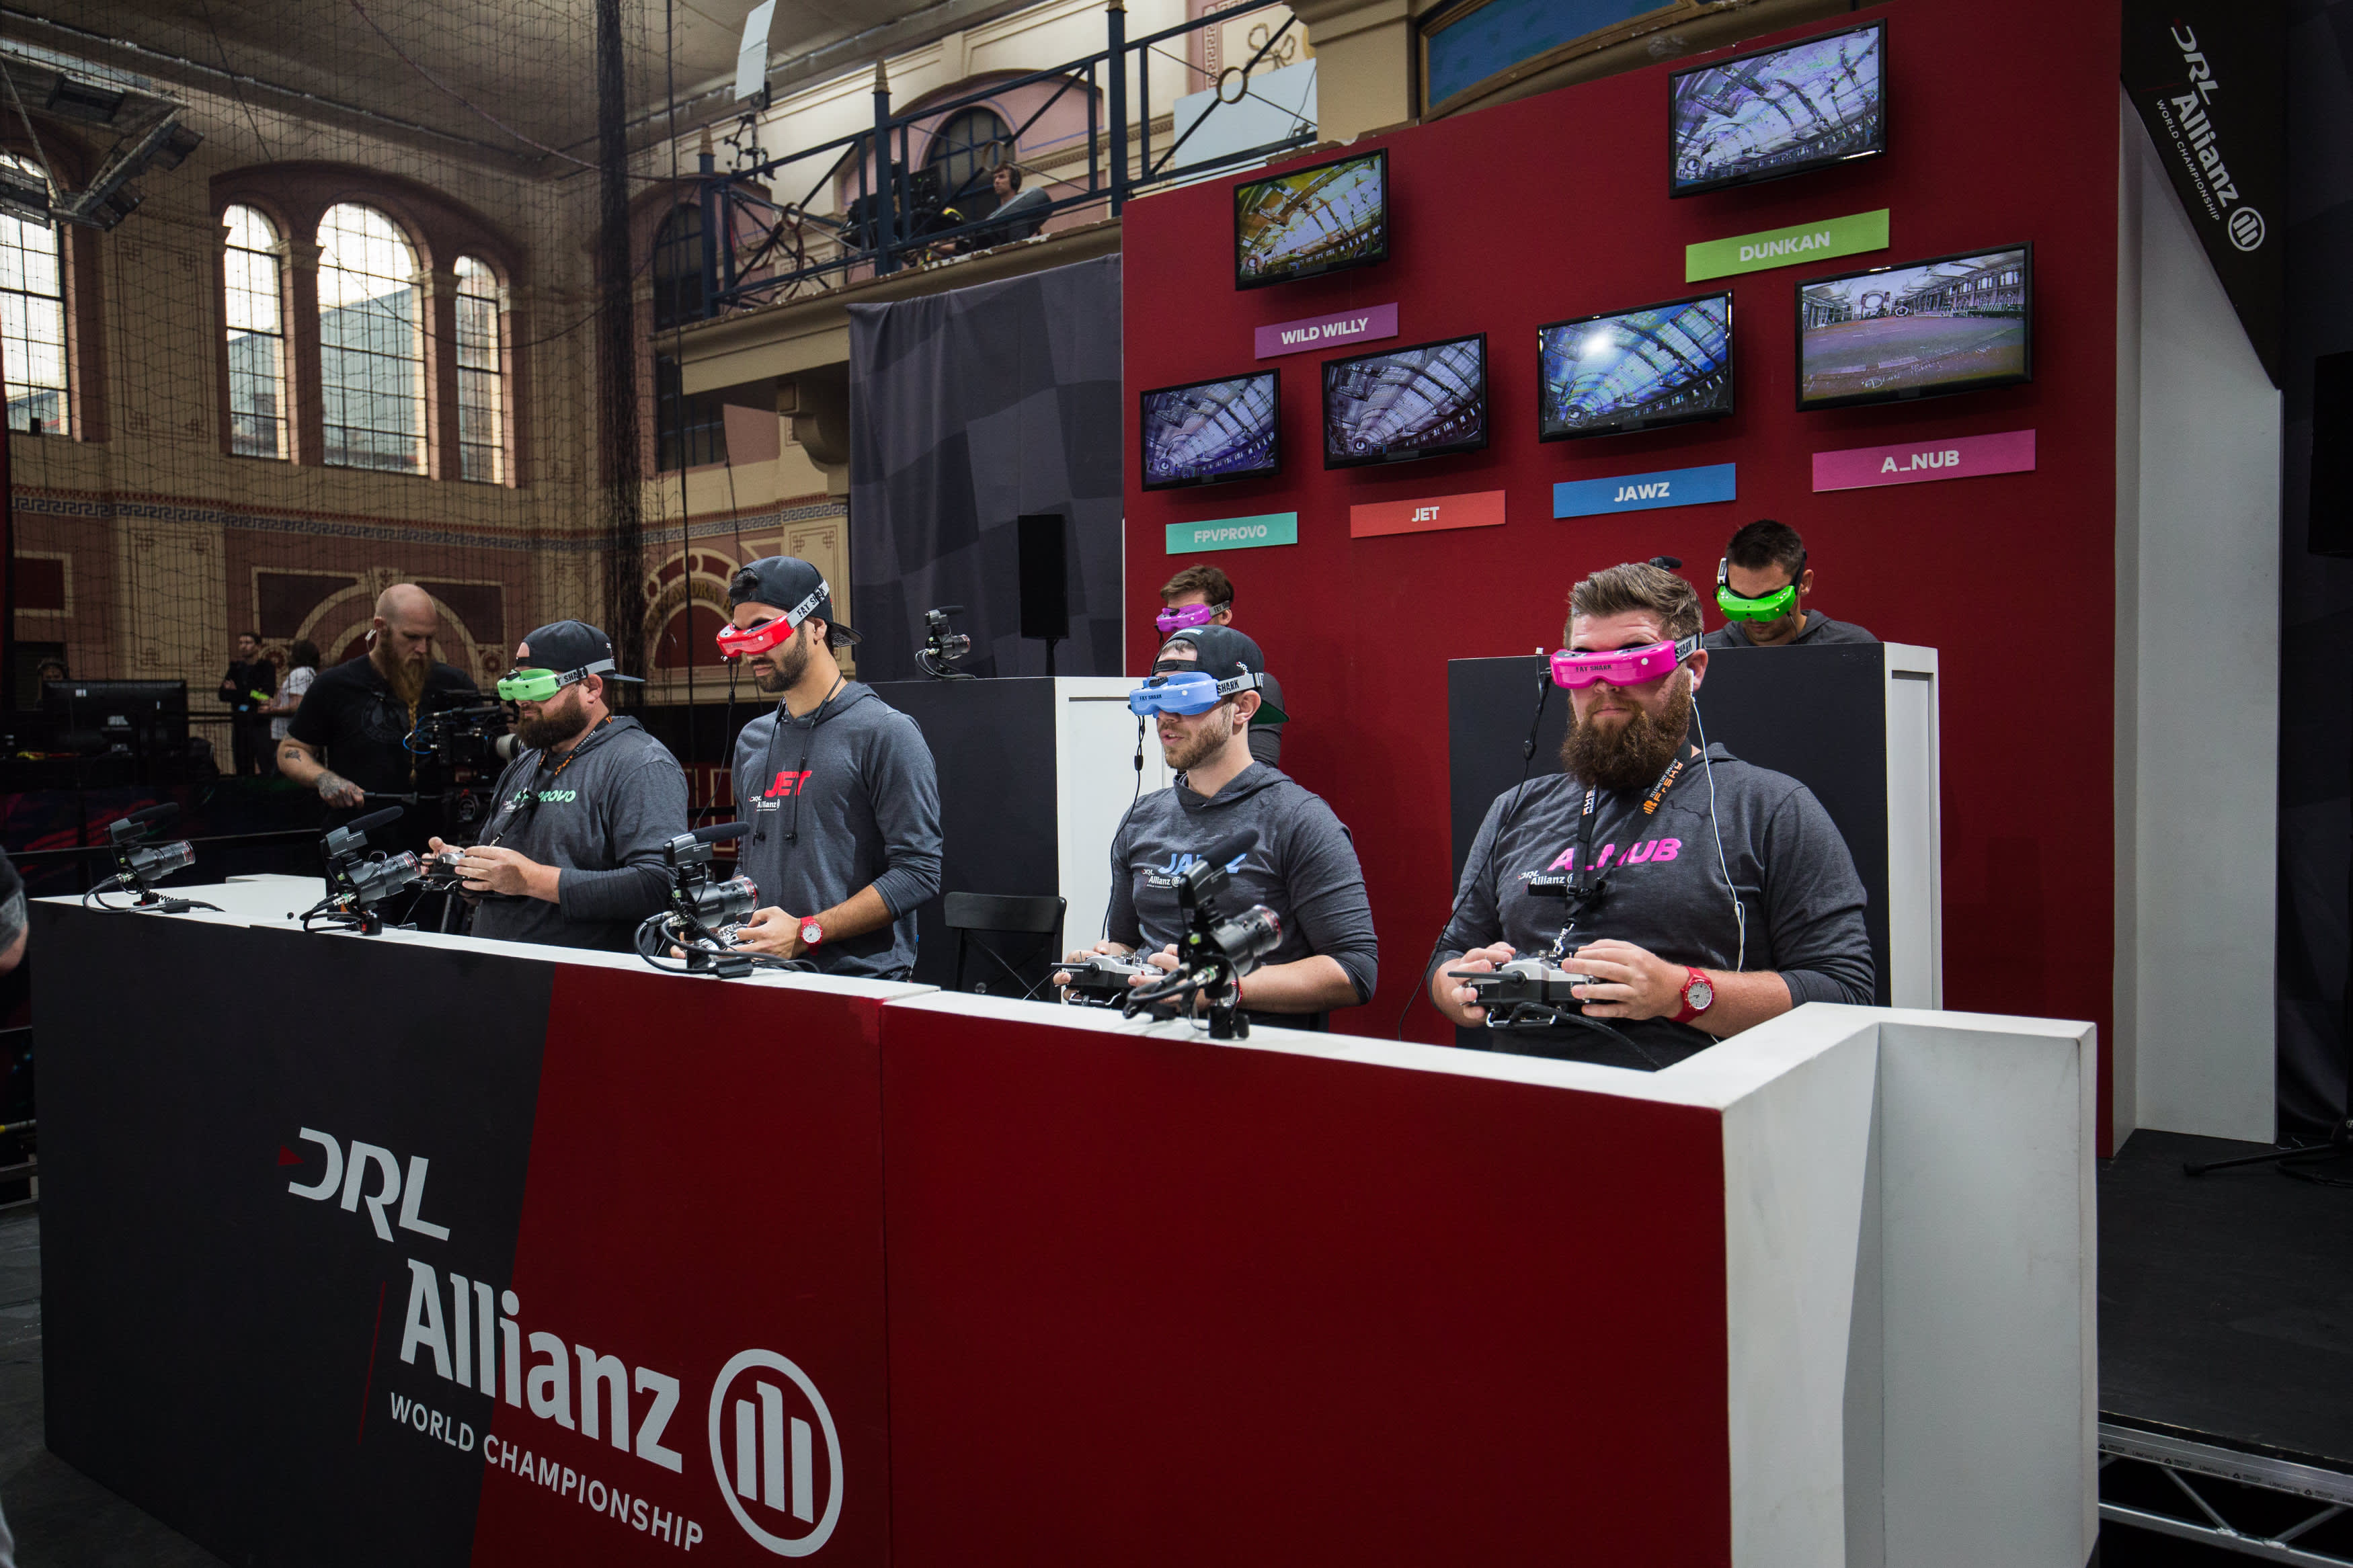 The partnership between DraftKings and Drone Racing League allows you to bet on drone racing